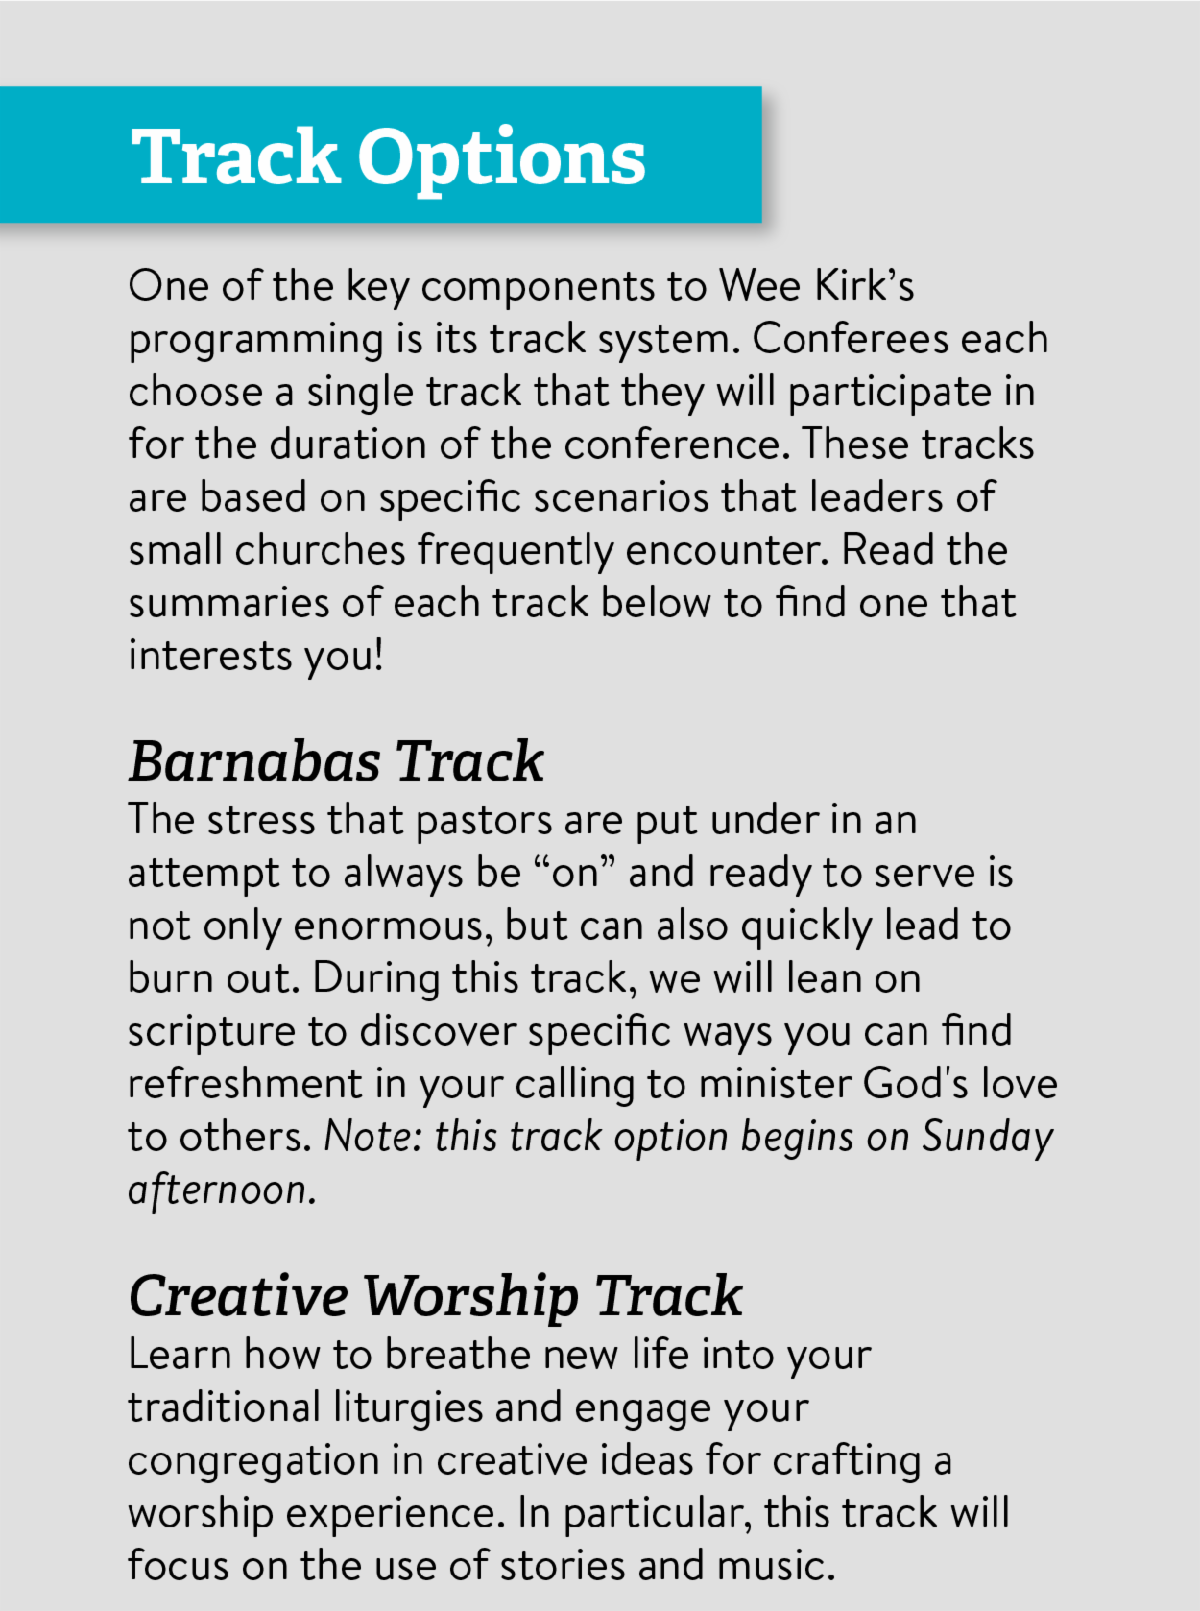 Track Options - One of the key components to Wee Kirk’s programming is its track system. Conferees each choose a single track that they will participate in for the duration of the conference. These tracks are based on specific scenarios that leaders of small churches frequently encounter. Read the summaries of each track below to find one that interests you! Barnabas Track The stress that pastors are put under in an attempt to always be “on” and ready to serve is not only enormous, but can also quickly lead to burn out. During this track, we will lean on scripture to discover specific ways you can find refreshment in your calling to minister God's love to others. Note: this track option begins on Sunday afternoon. Creative Worship Track Learn how to breathe new life into your traditional liturgies and engage your congregation in creative ideas for crafting a worship experience. In particular, this track will focus on the use of stories and music.